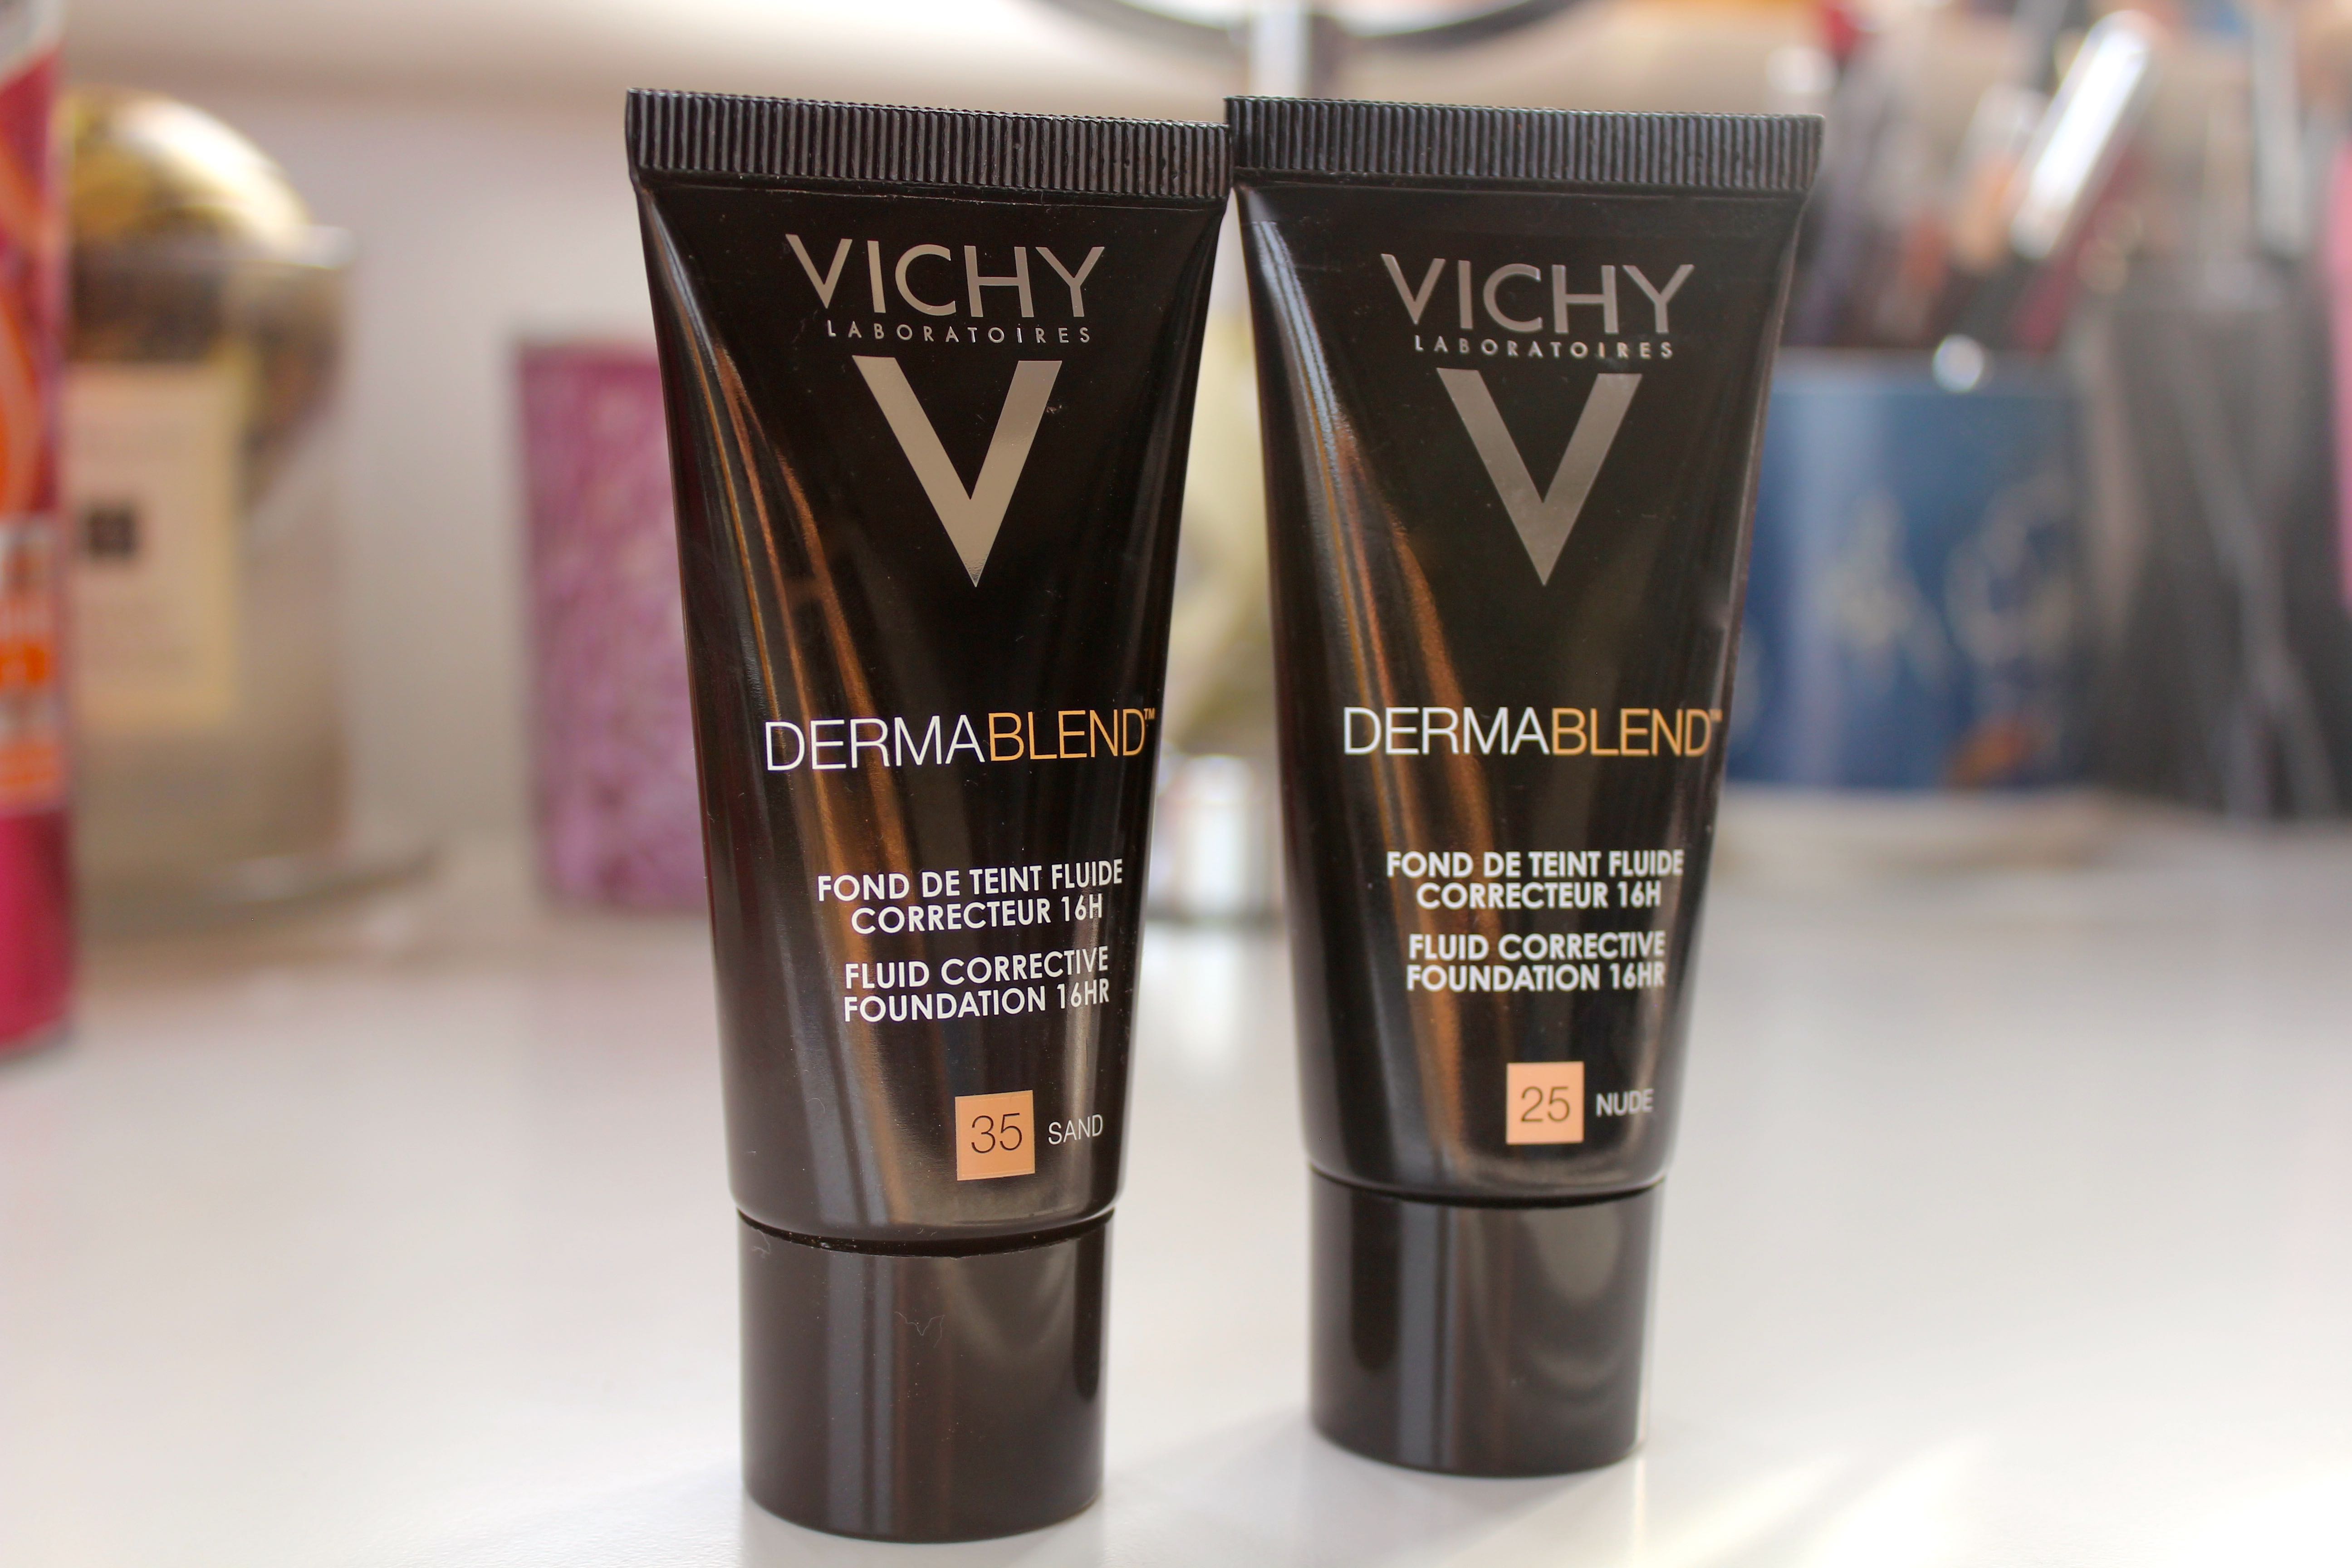 Vichy Dermablend Foundation Review - Face Made Up - Beauty Product Reviews, Makeup Tutorial Videos & Lifestyle